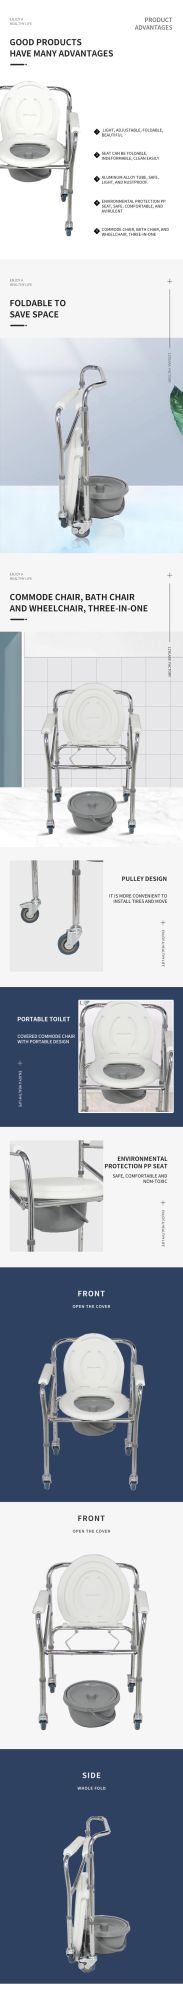 Elderly Commode Chair Handicapped Medical Bath Chair Bathroom Shower Seat Toilet Chair Commode with Two Wheels